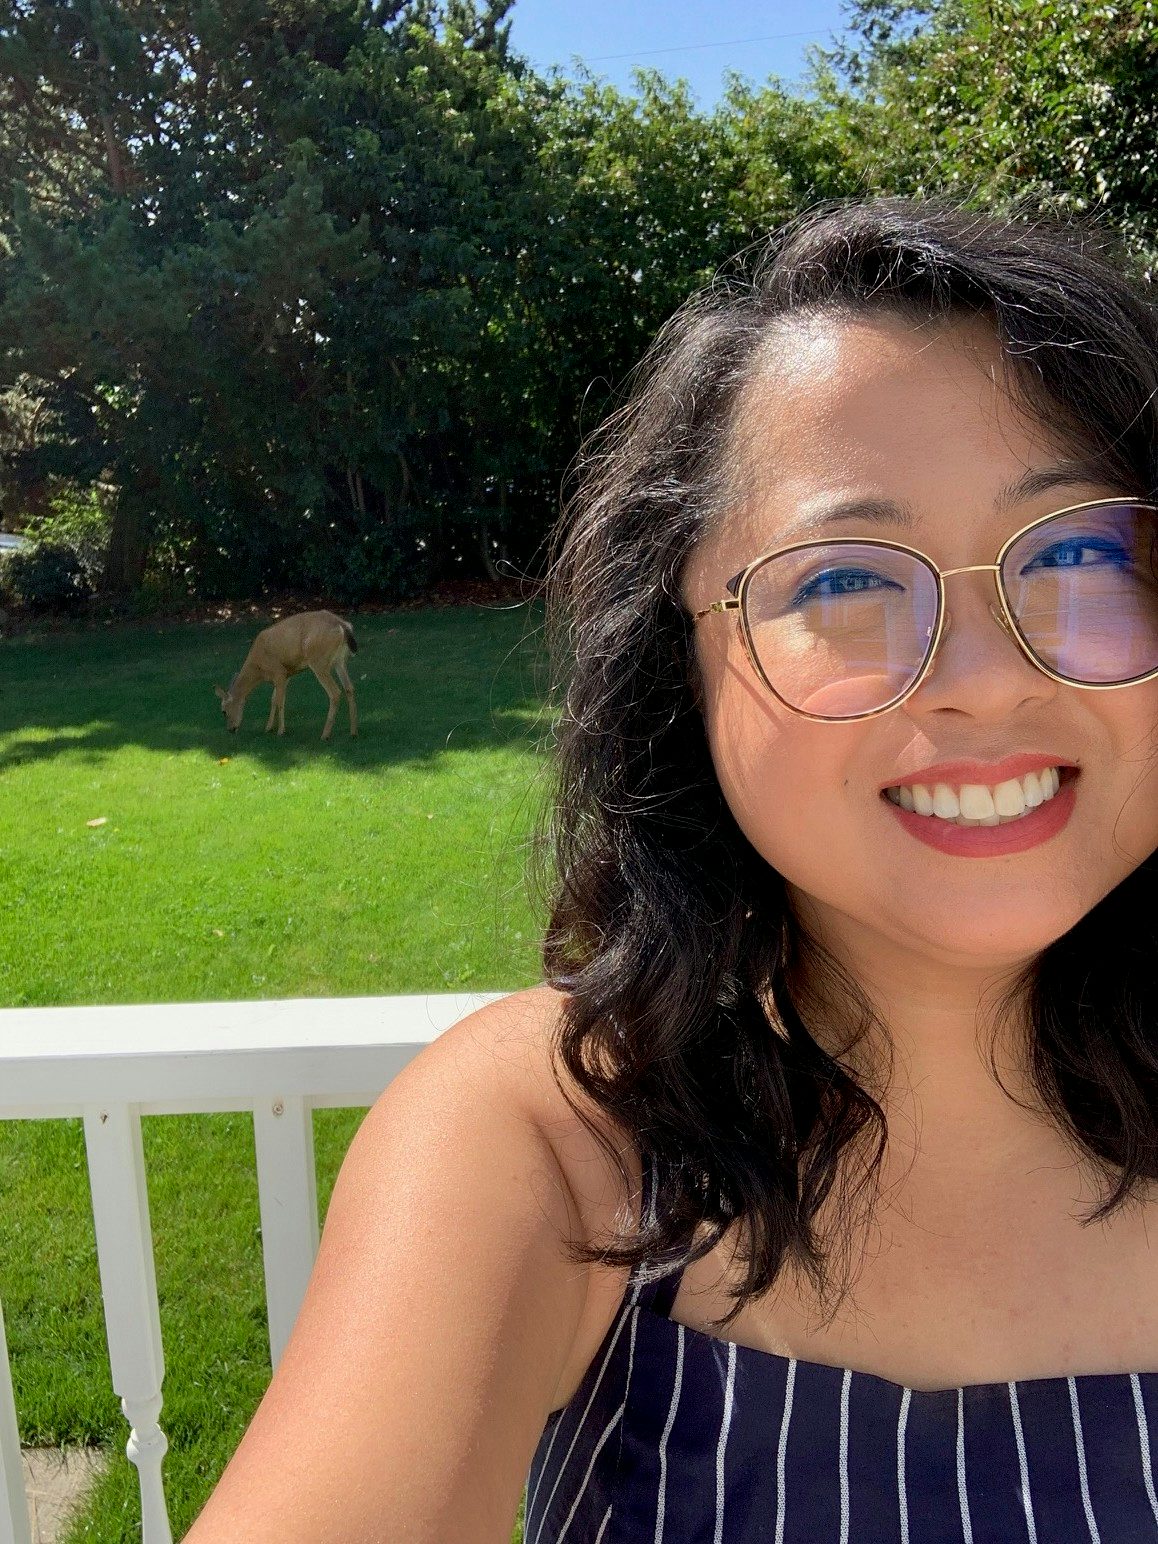 Travel advisor Jennyl Calugas wears a striped navy and blue top and smiles in front of a backyard with a dog in the grass